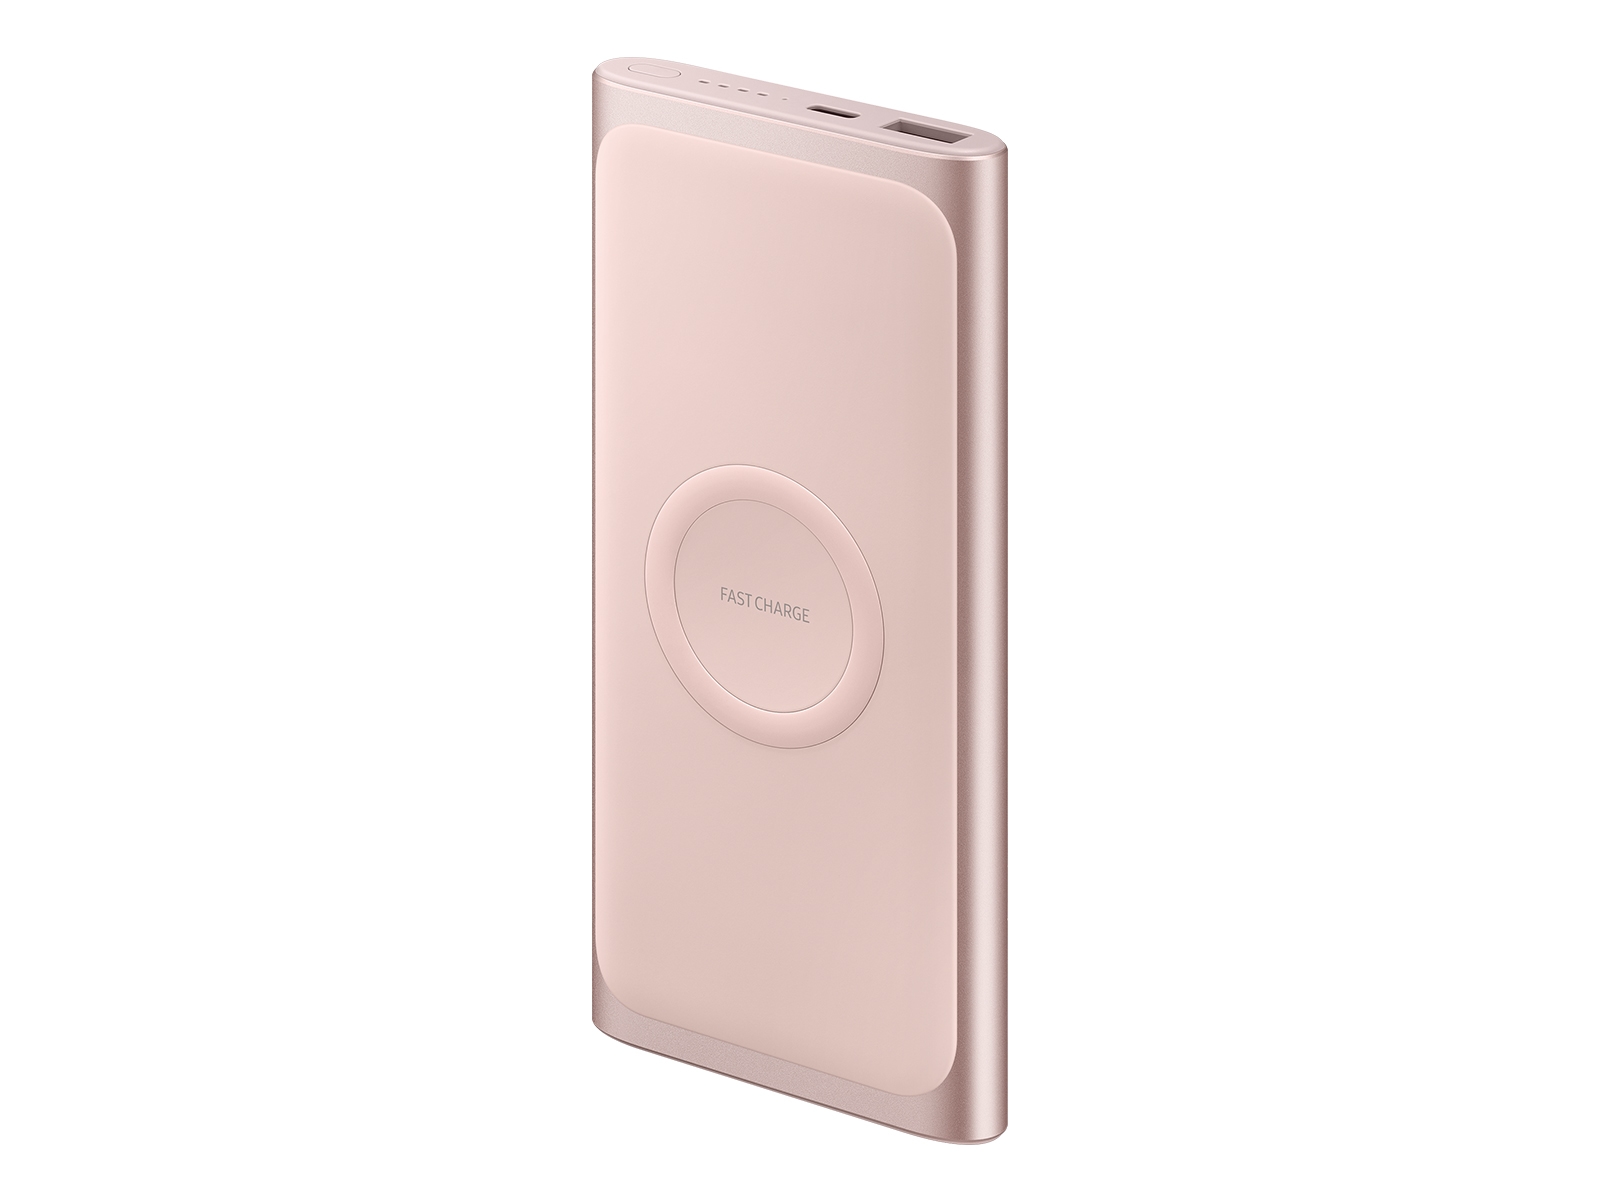 Wireless Charger Portable Battery 10,000 mAh, Pink